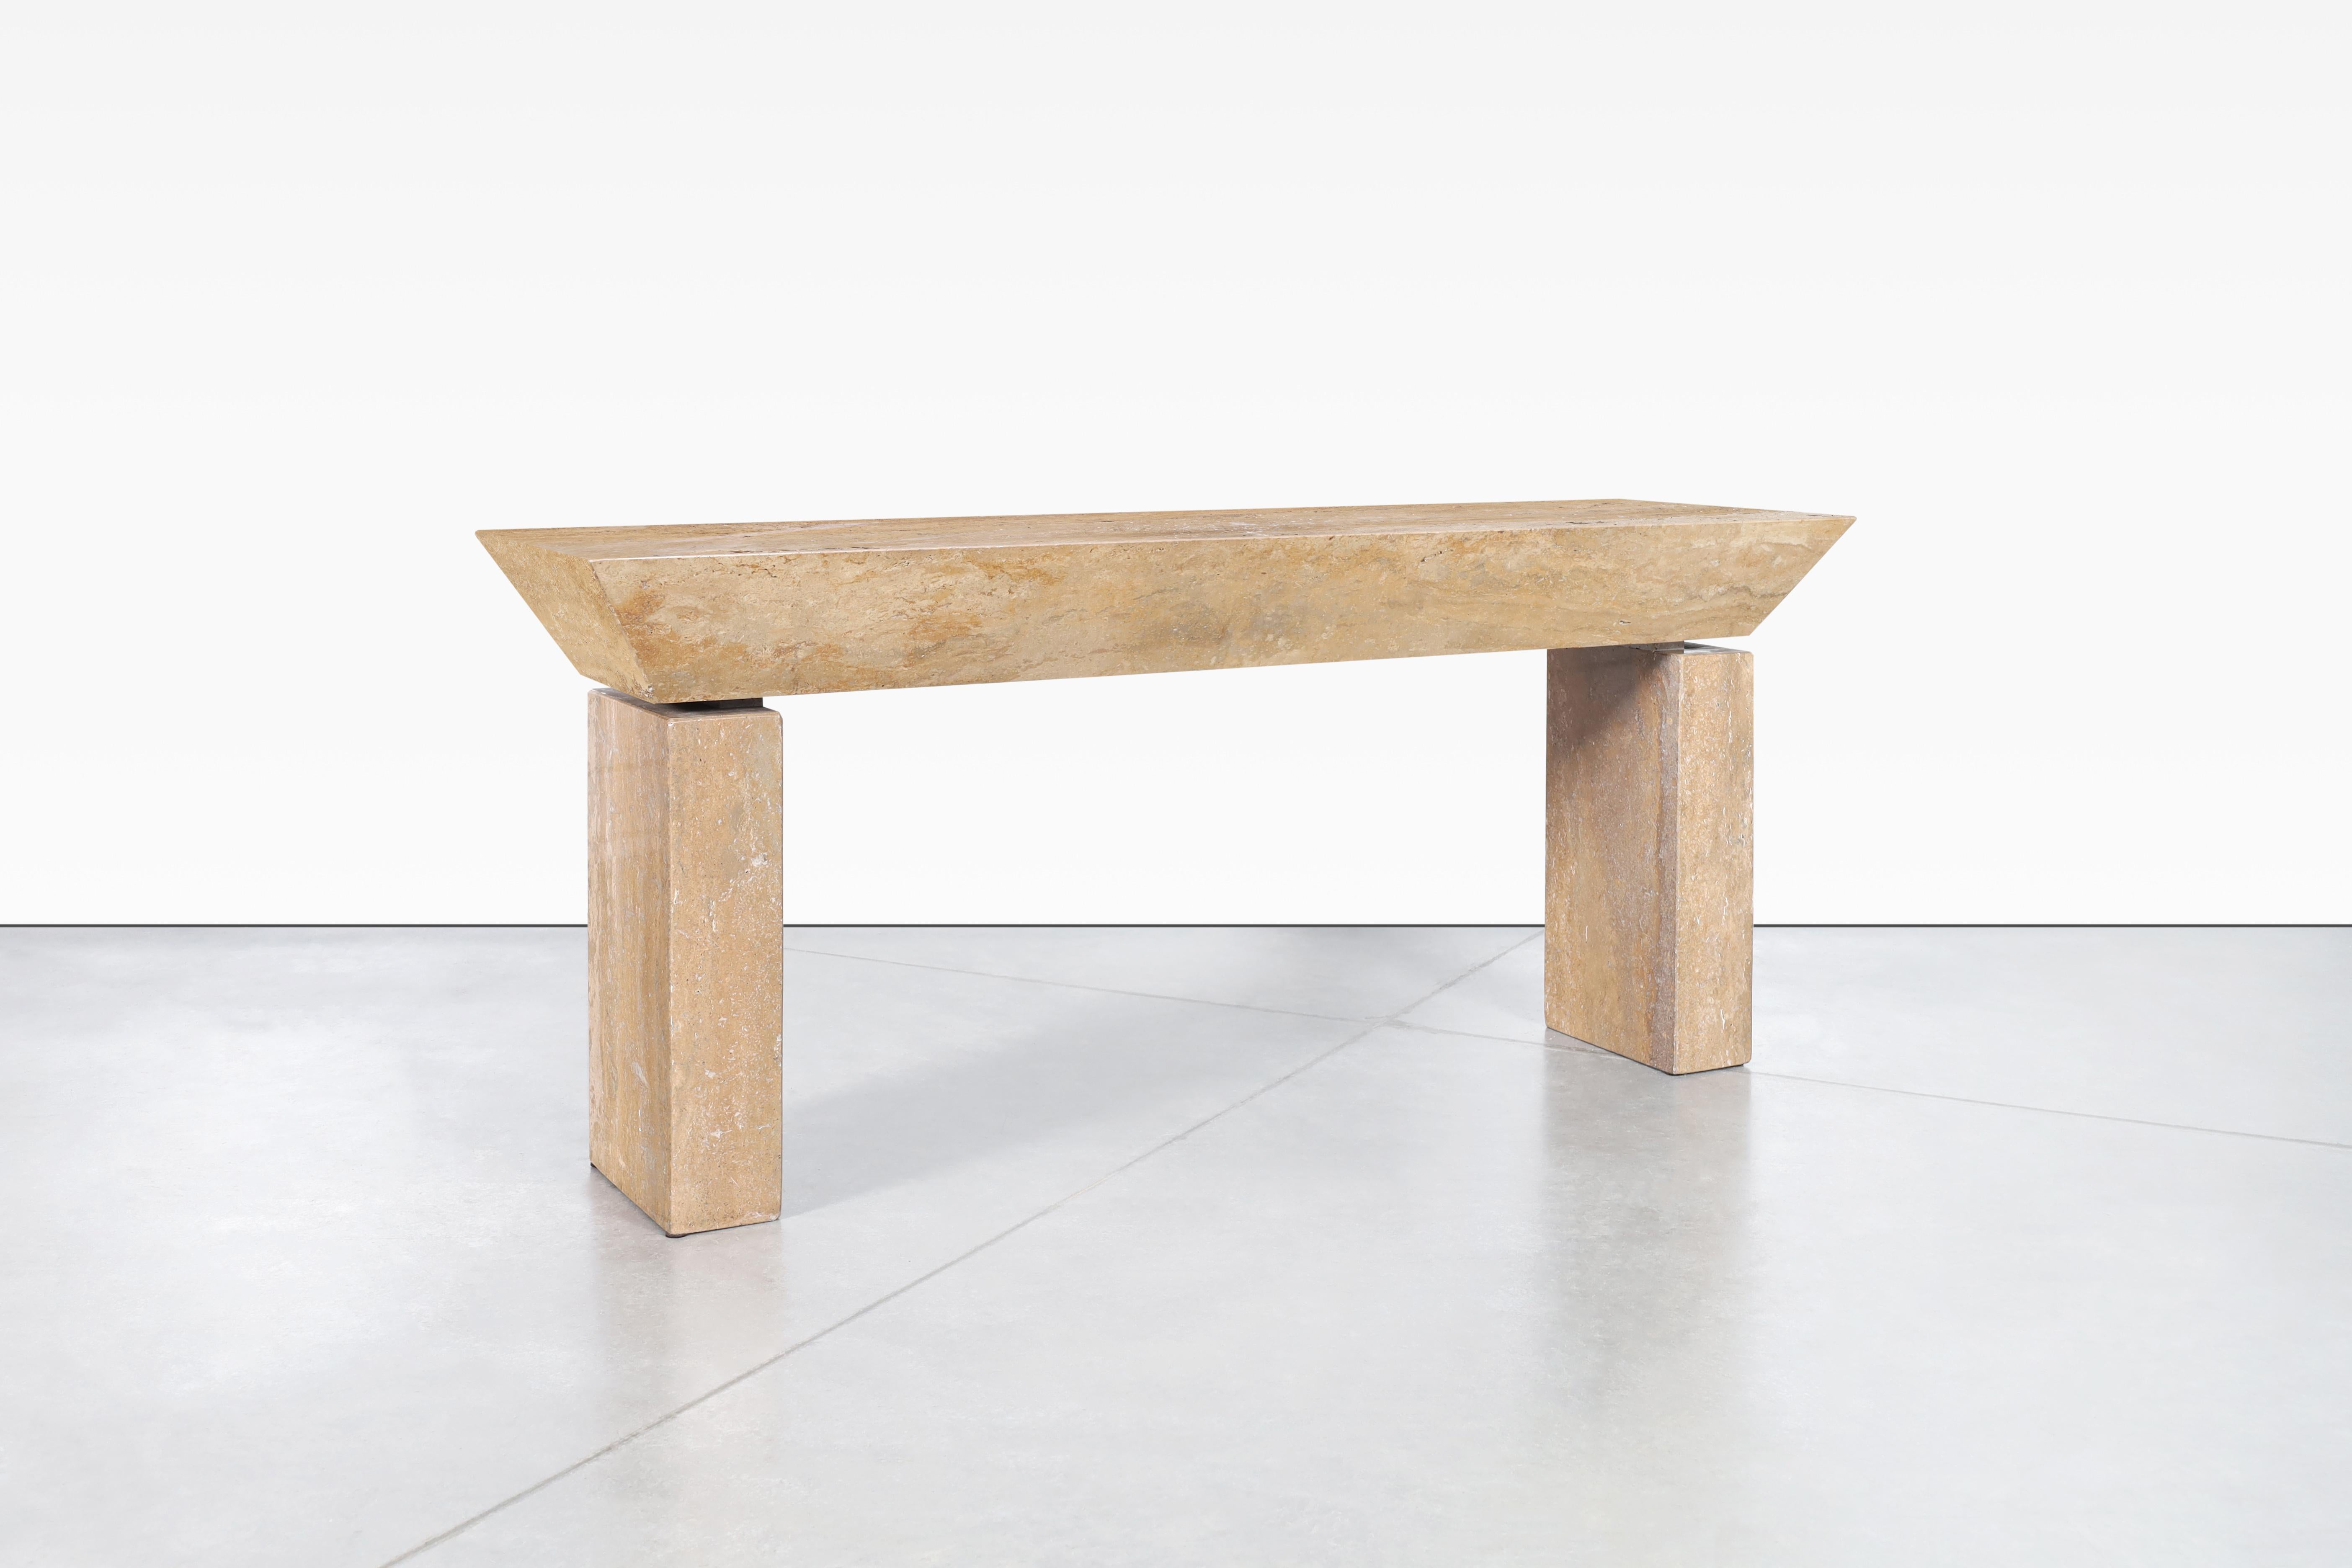 Wonderful Italian modernist travertine console table designed in Italy. The modernist design is perfectly complemented by the natural minerals of the travertine stone. The table features a rectangular travertine top with an angular cut around the